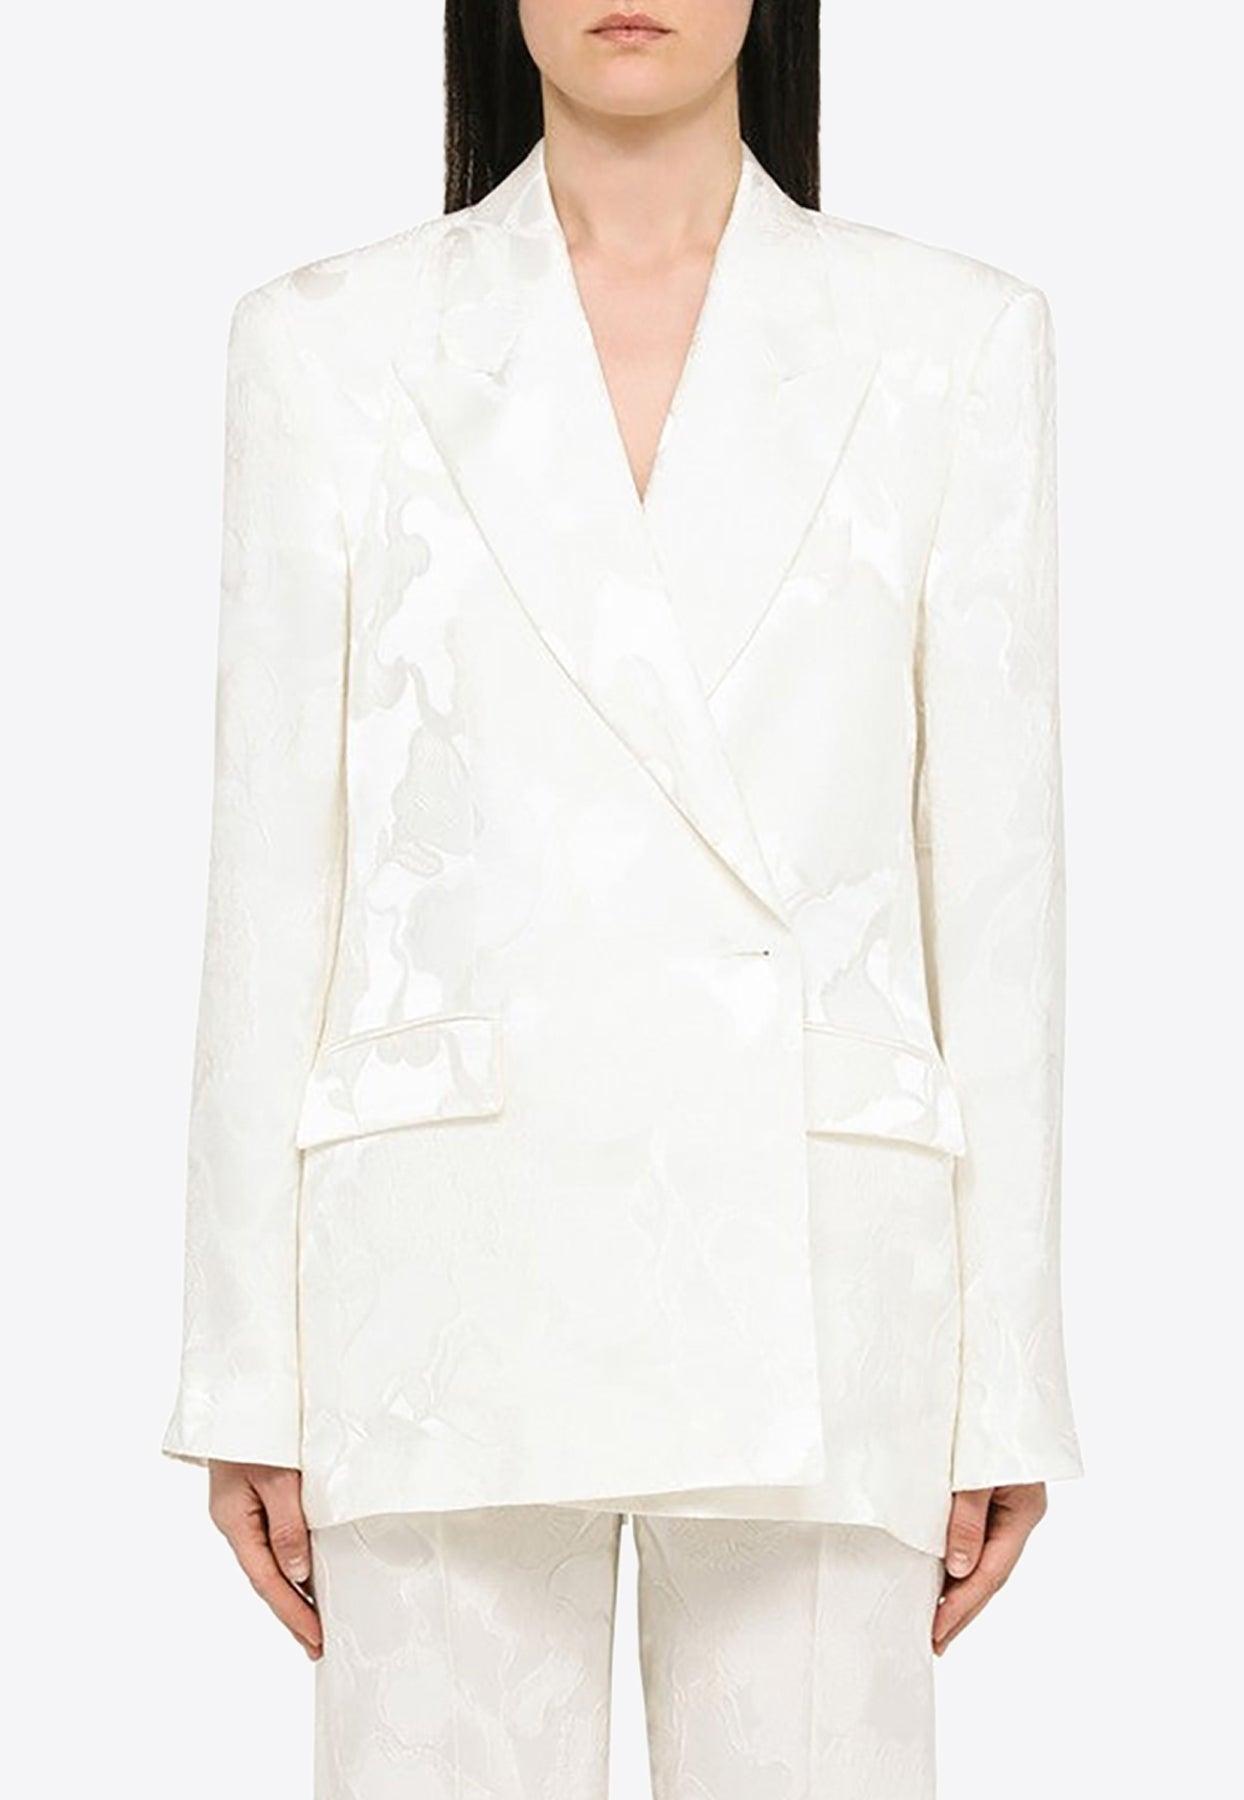 Dries Van Noten Satin Jacquard Double-breasted Blazer in White | Lyst